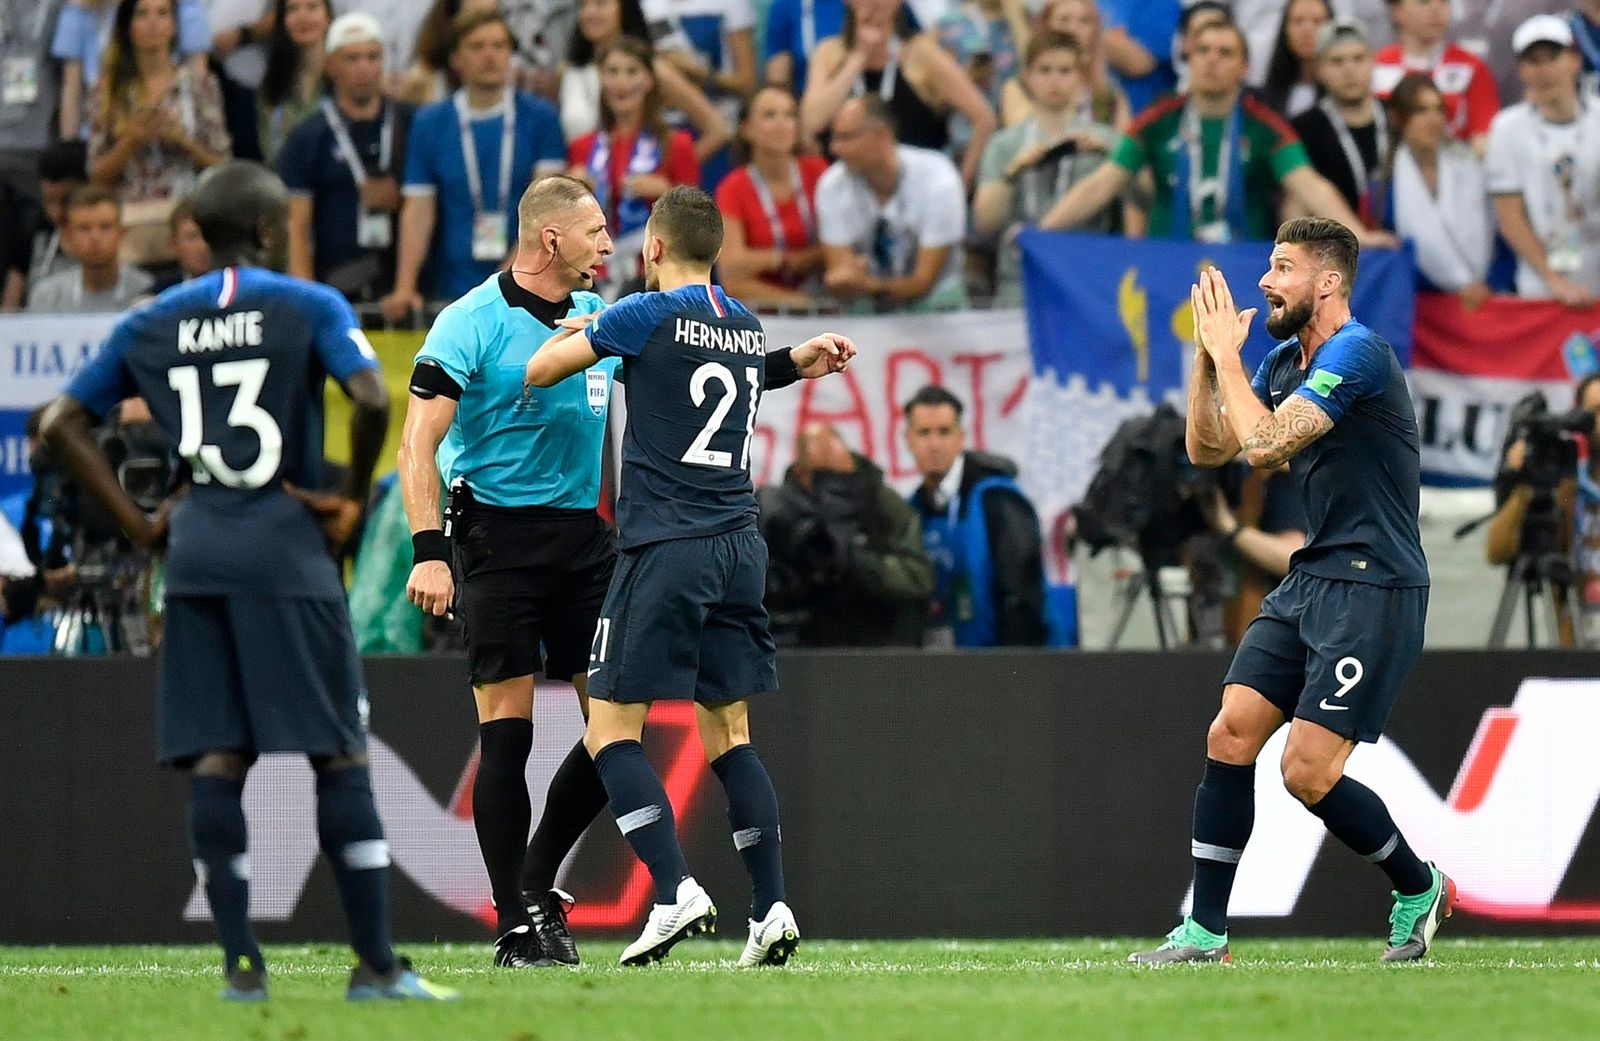 Referee Nestor Pitana from Argentina is surrounded by French players asking for a penalty during the final match between France and Croatia at the 2018 soccer World Cup in the Luzhniki Stadium in Moscow, Russia, Sunday, July 15, 2018. (AP Photo/Martin Meissner)